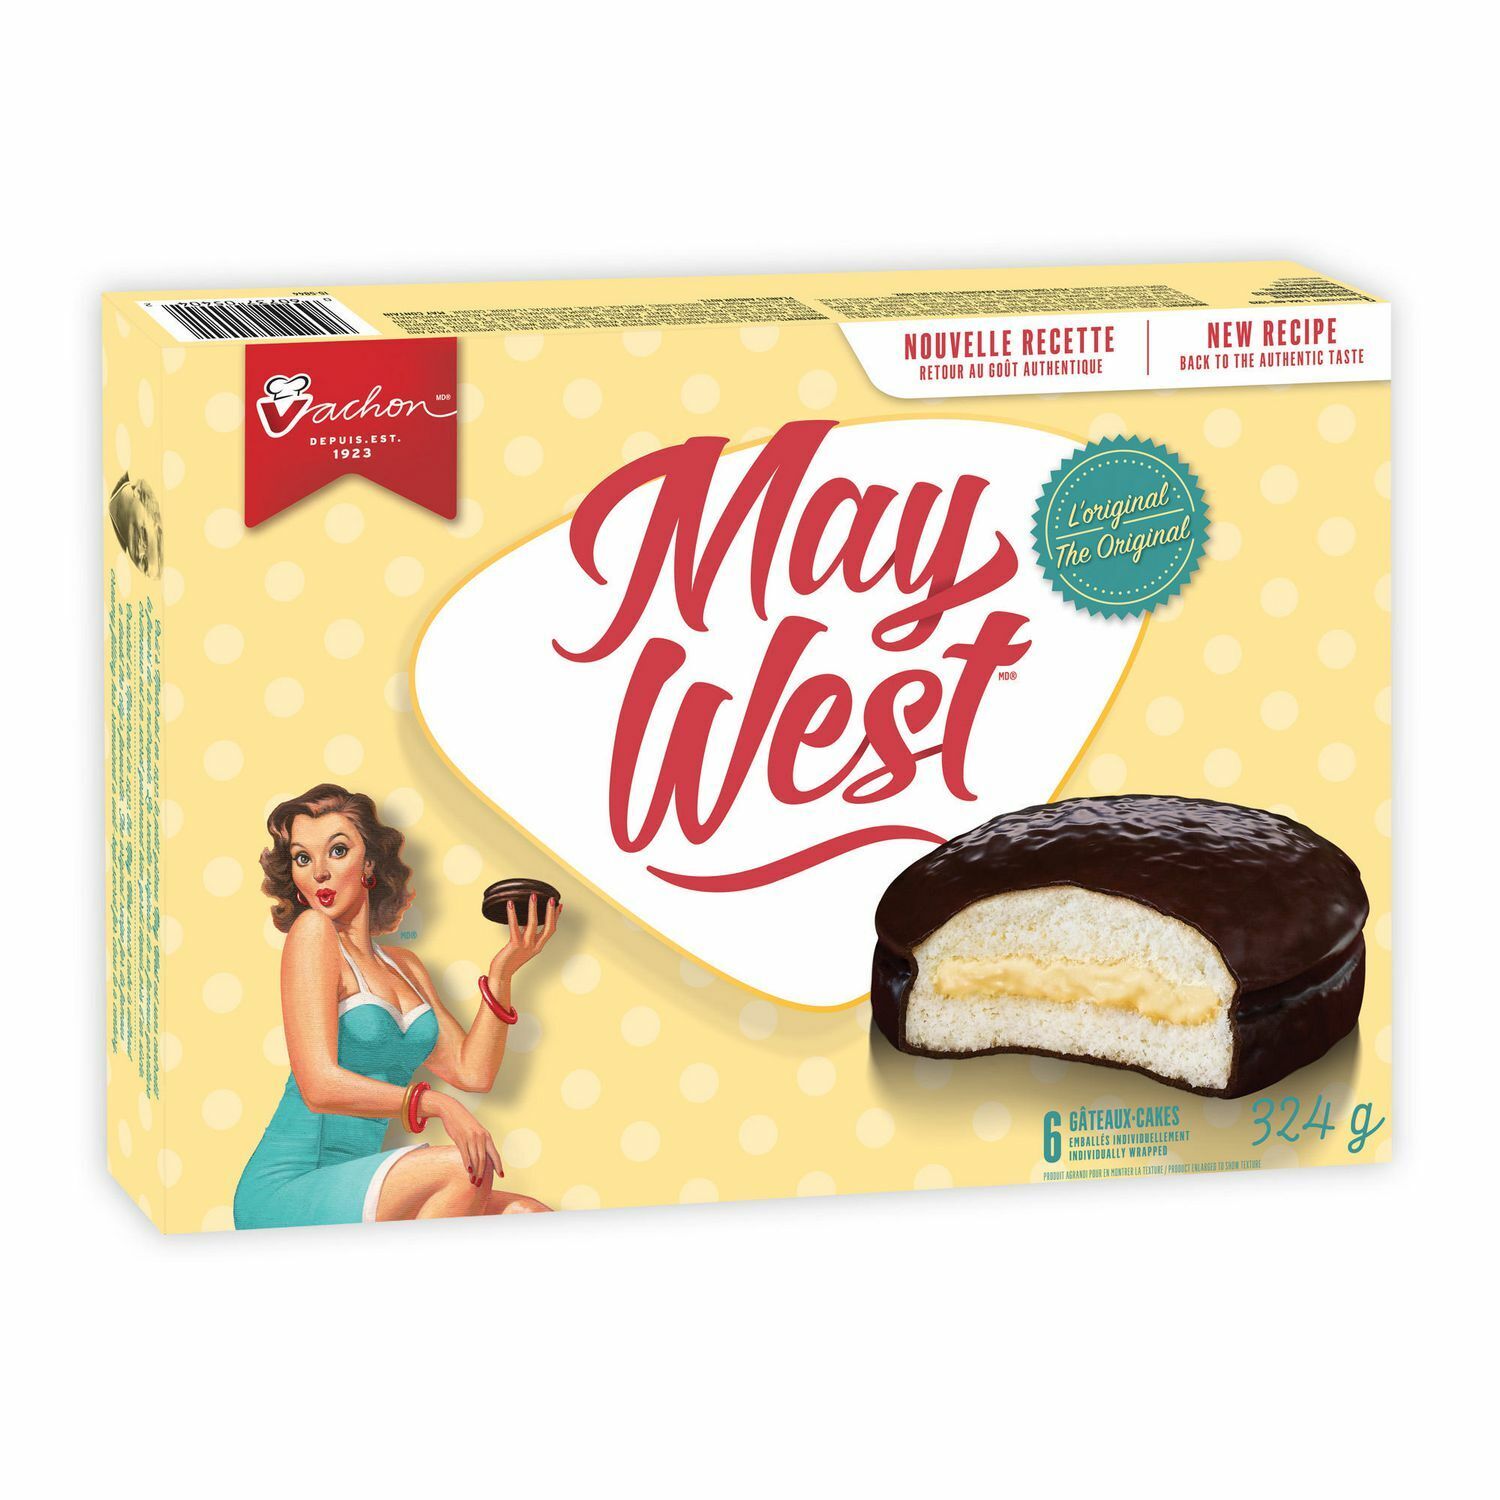 3 Boxes Vachon May West Cake 6 Count 336g -18 Total Cakes Canada FRESH DELICIOUS